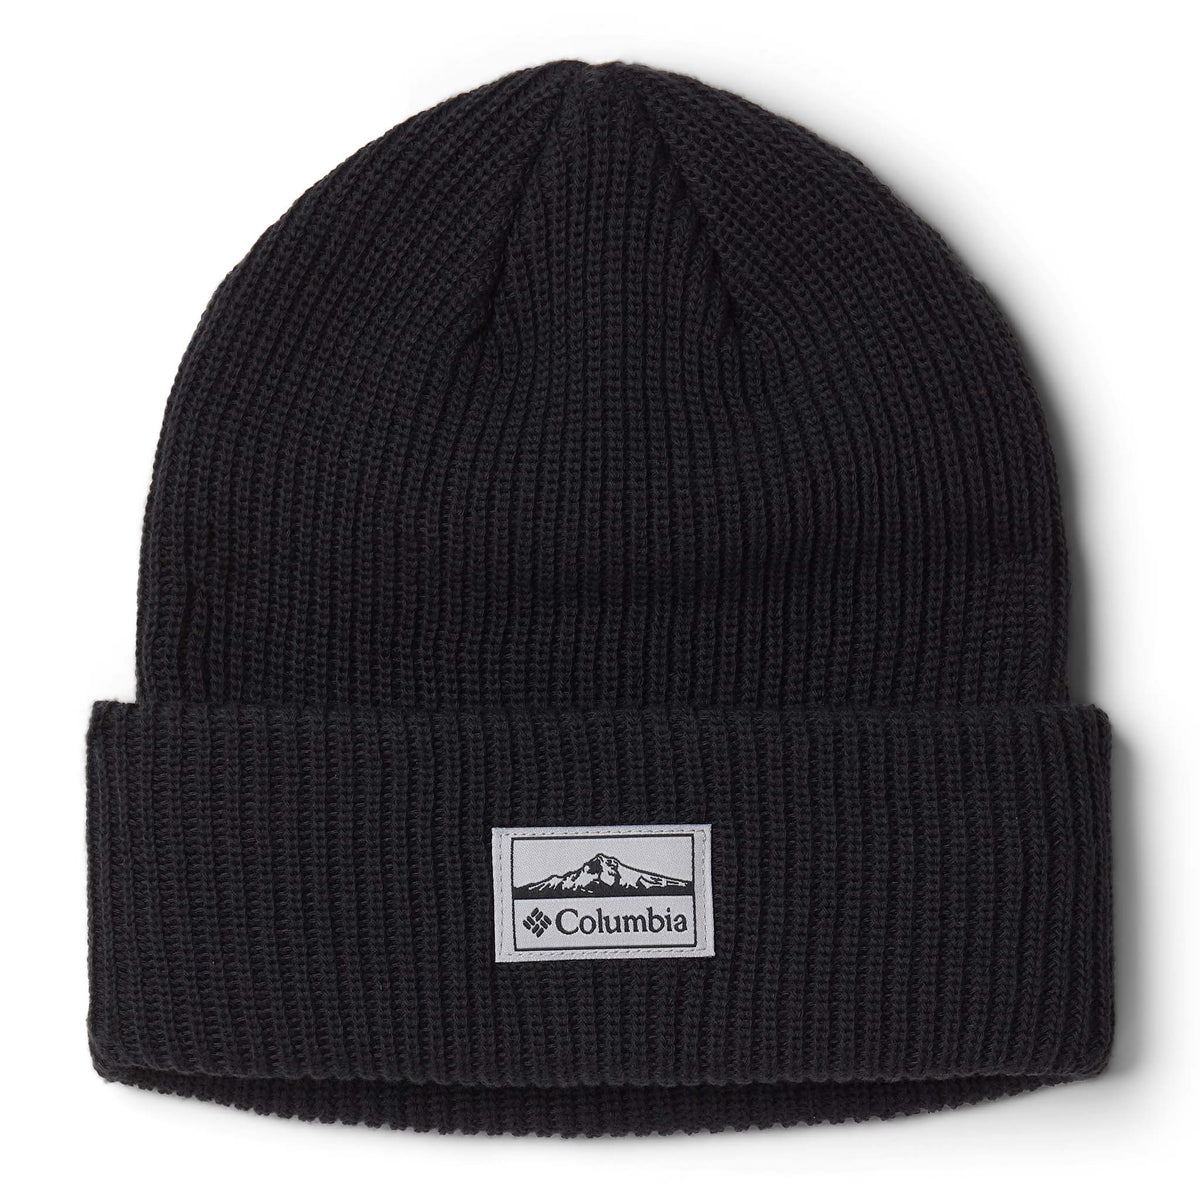 Columbia Lost Lager Beanie II tuque unisexe noir